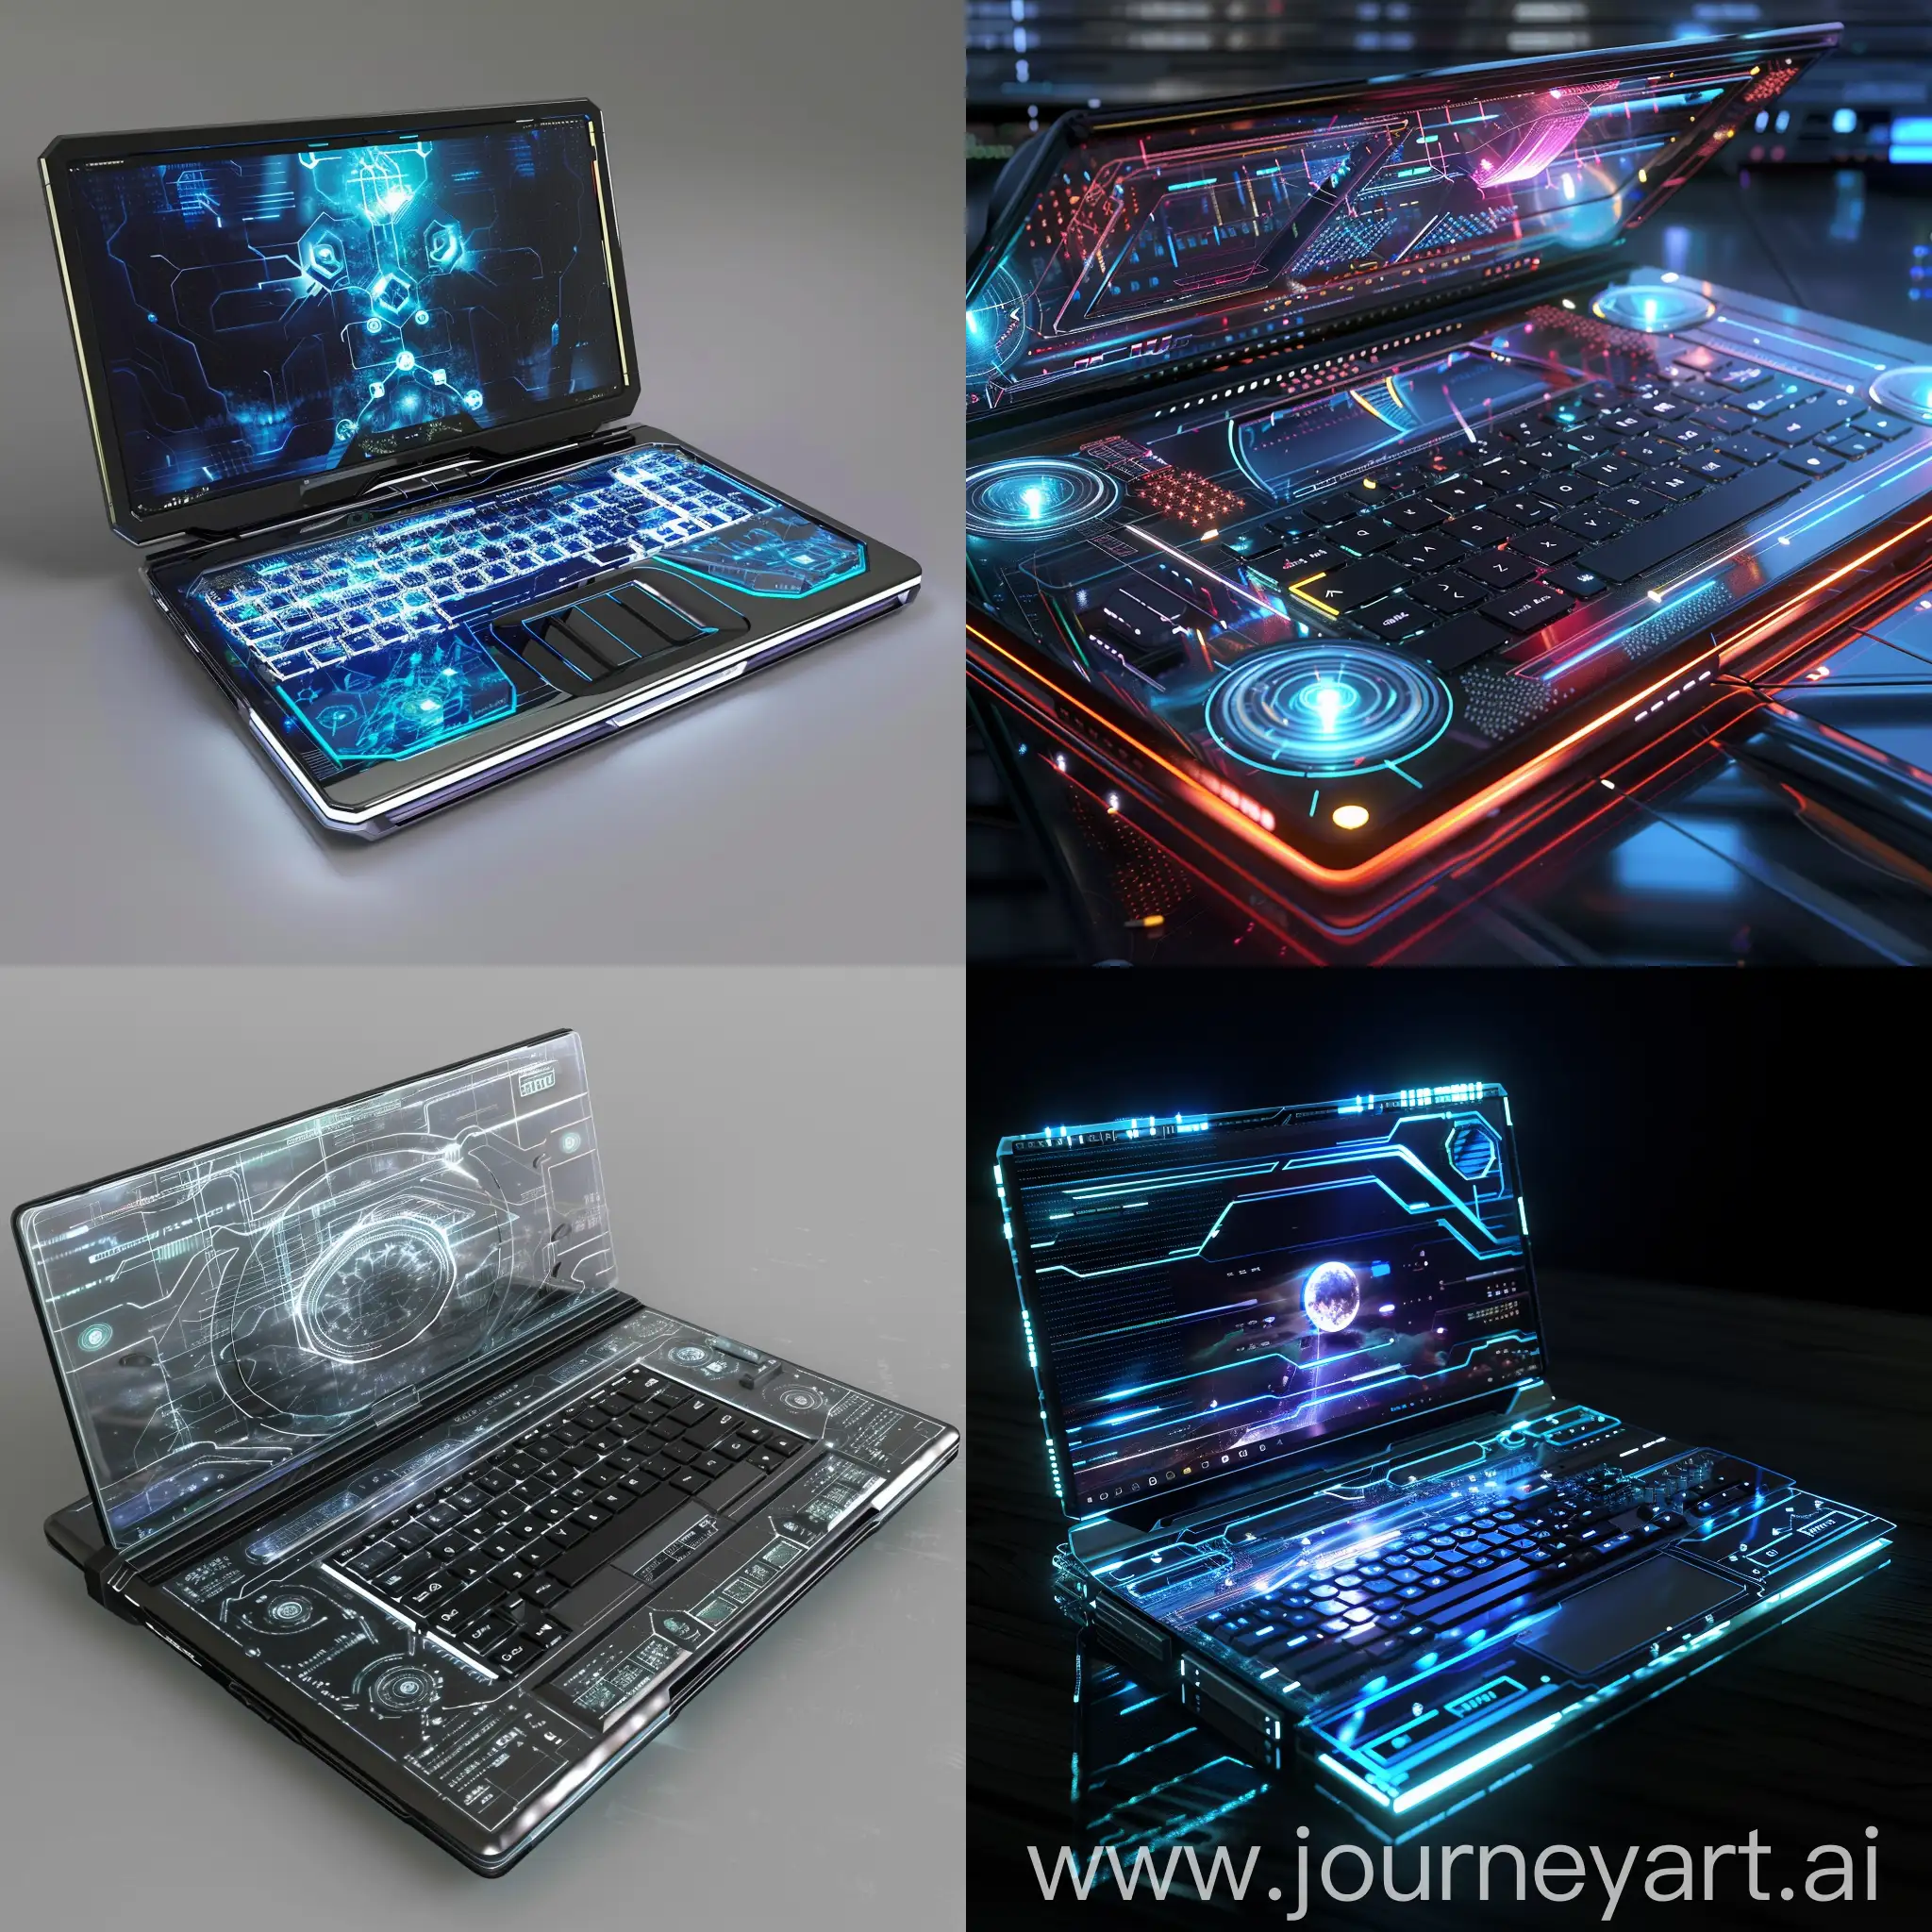 SciFi-Laptop-with-Advanced-Technology-Features-Graphene-Batteries-Quantum-Processors-and-Holographic-Displays